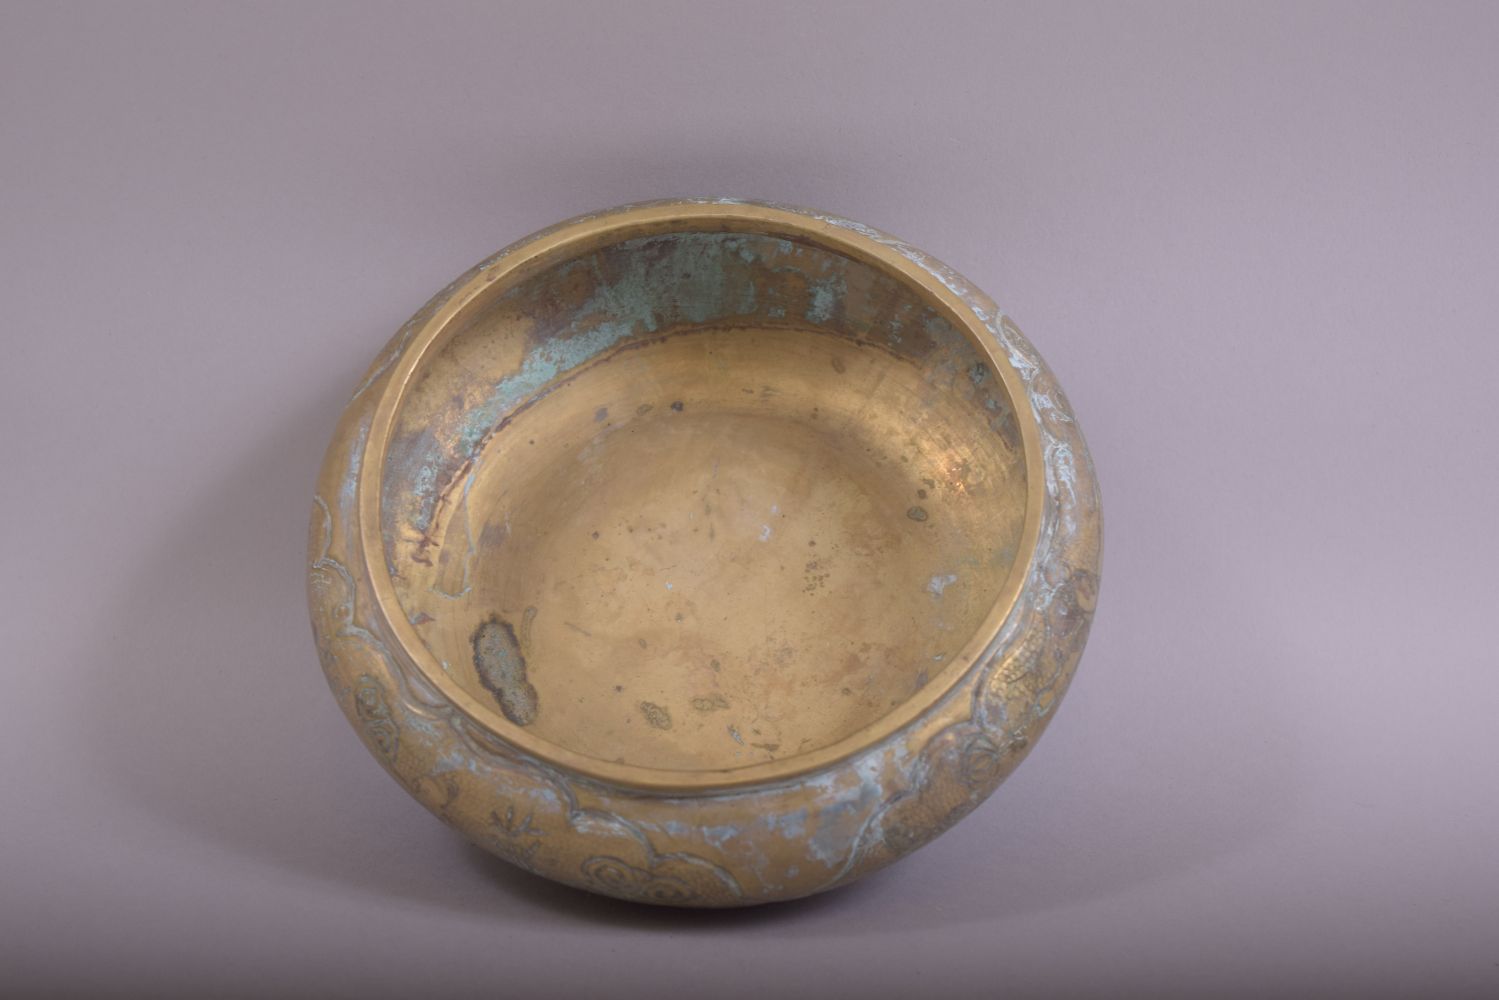 A CHINESE EMBOSSED AND CHASED BRONZE BOWL, with scenes of men on horseback in outdoor settings, - Image 5 of 7